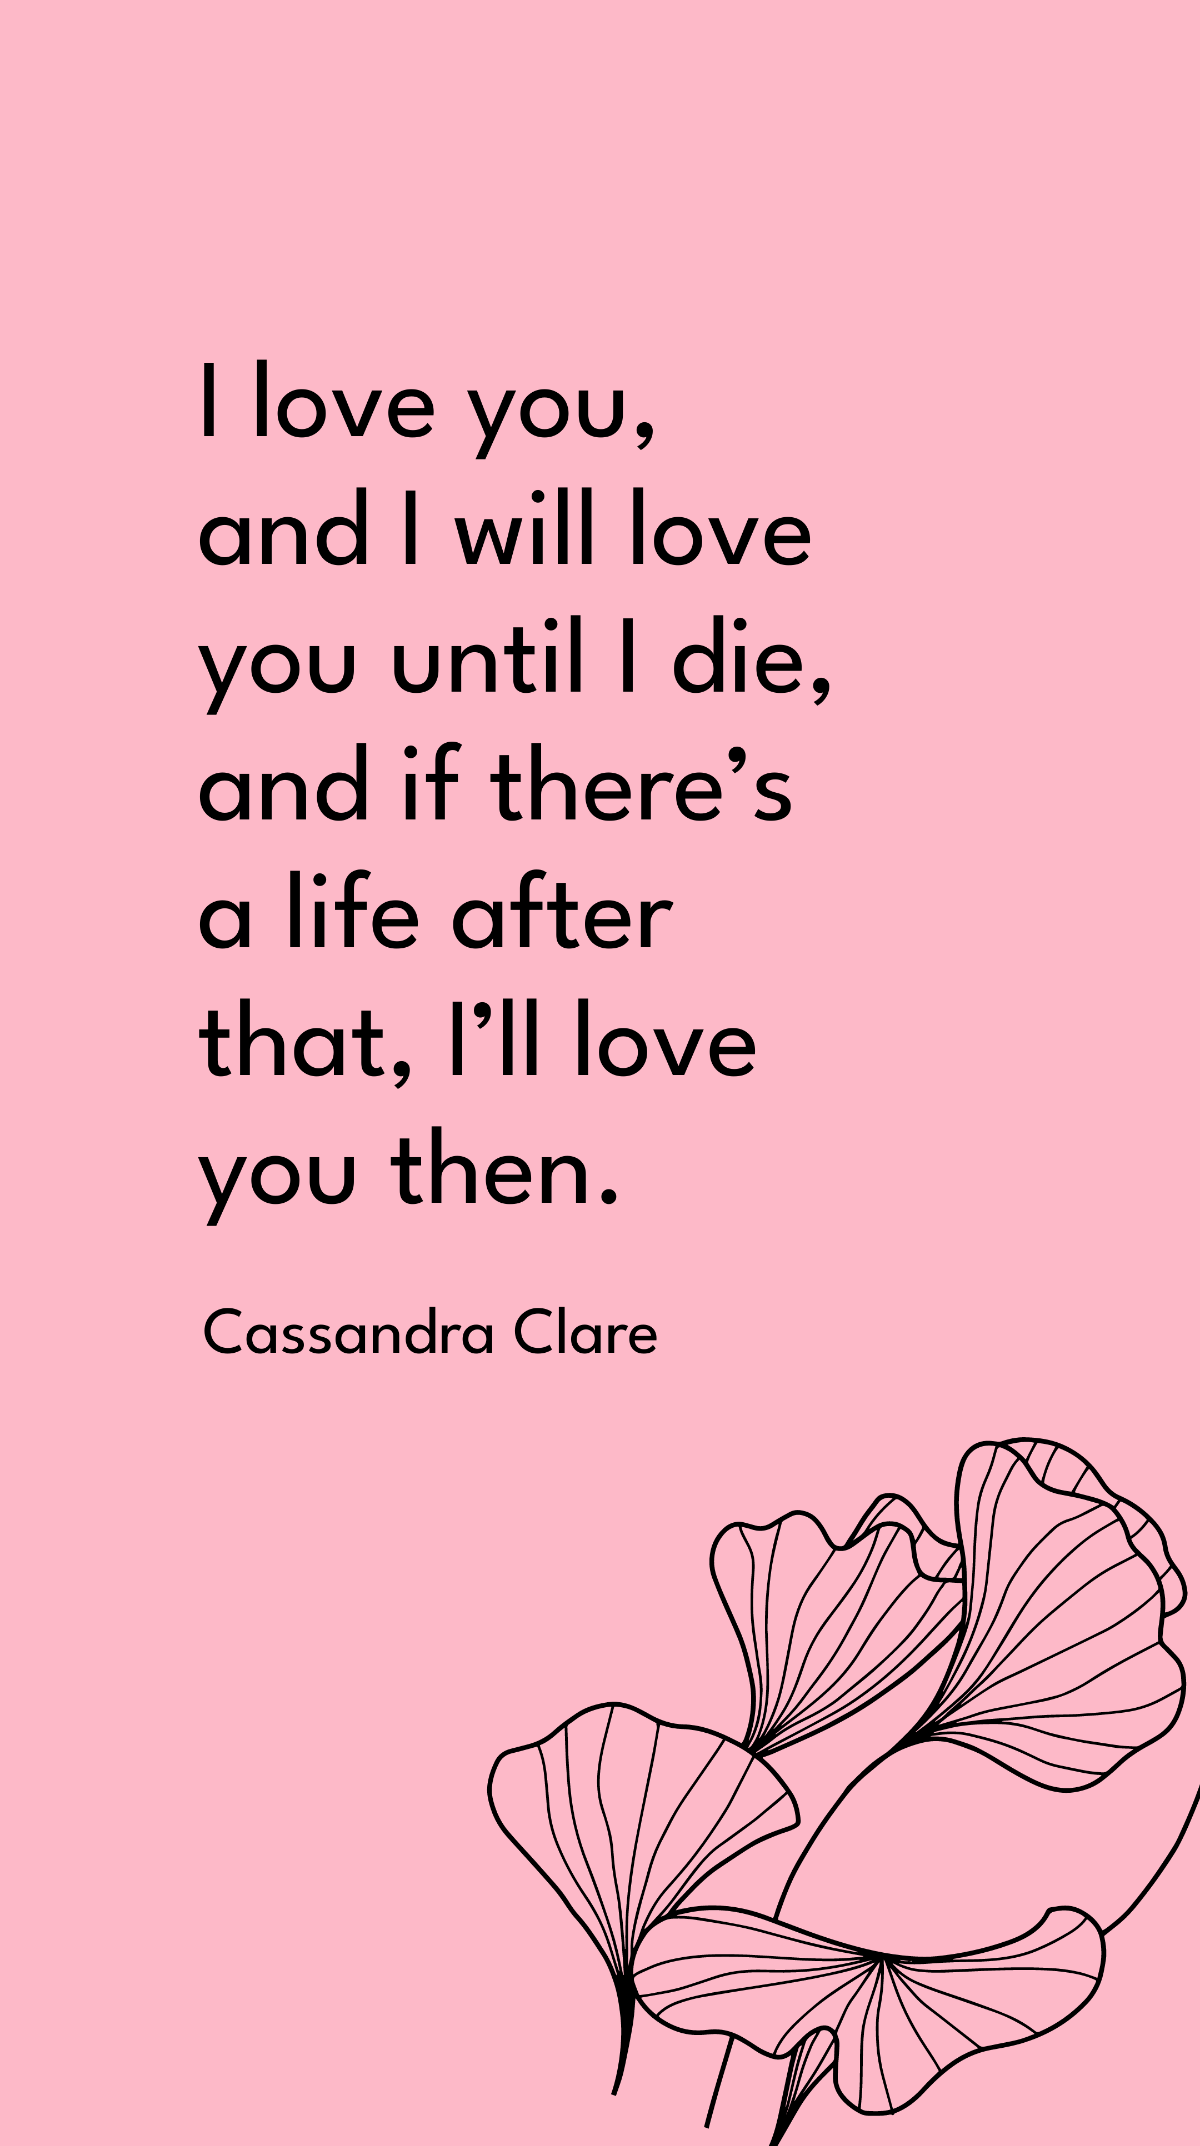 Cassandra Clare - I love you, and I will love you until I die, and if there’s a life after that, I’ll love you then. Template